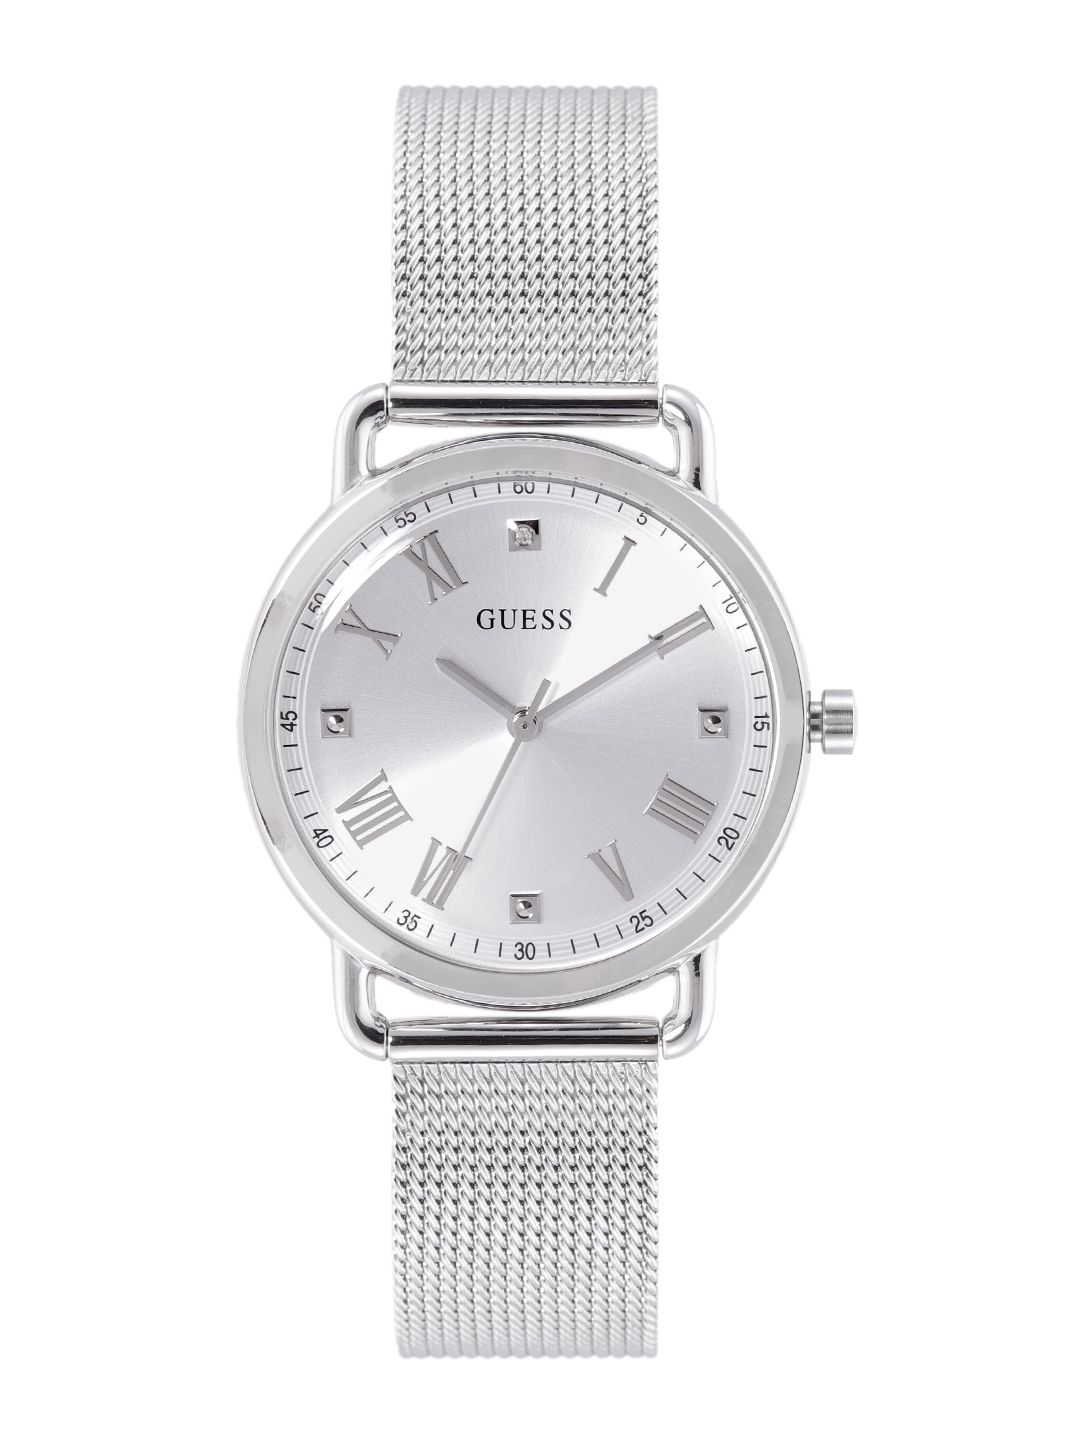 GUESS Women Silver-Toned Dial & Bracelet Style Straps Analogue Watch GW0031L1 Price in India